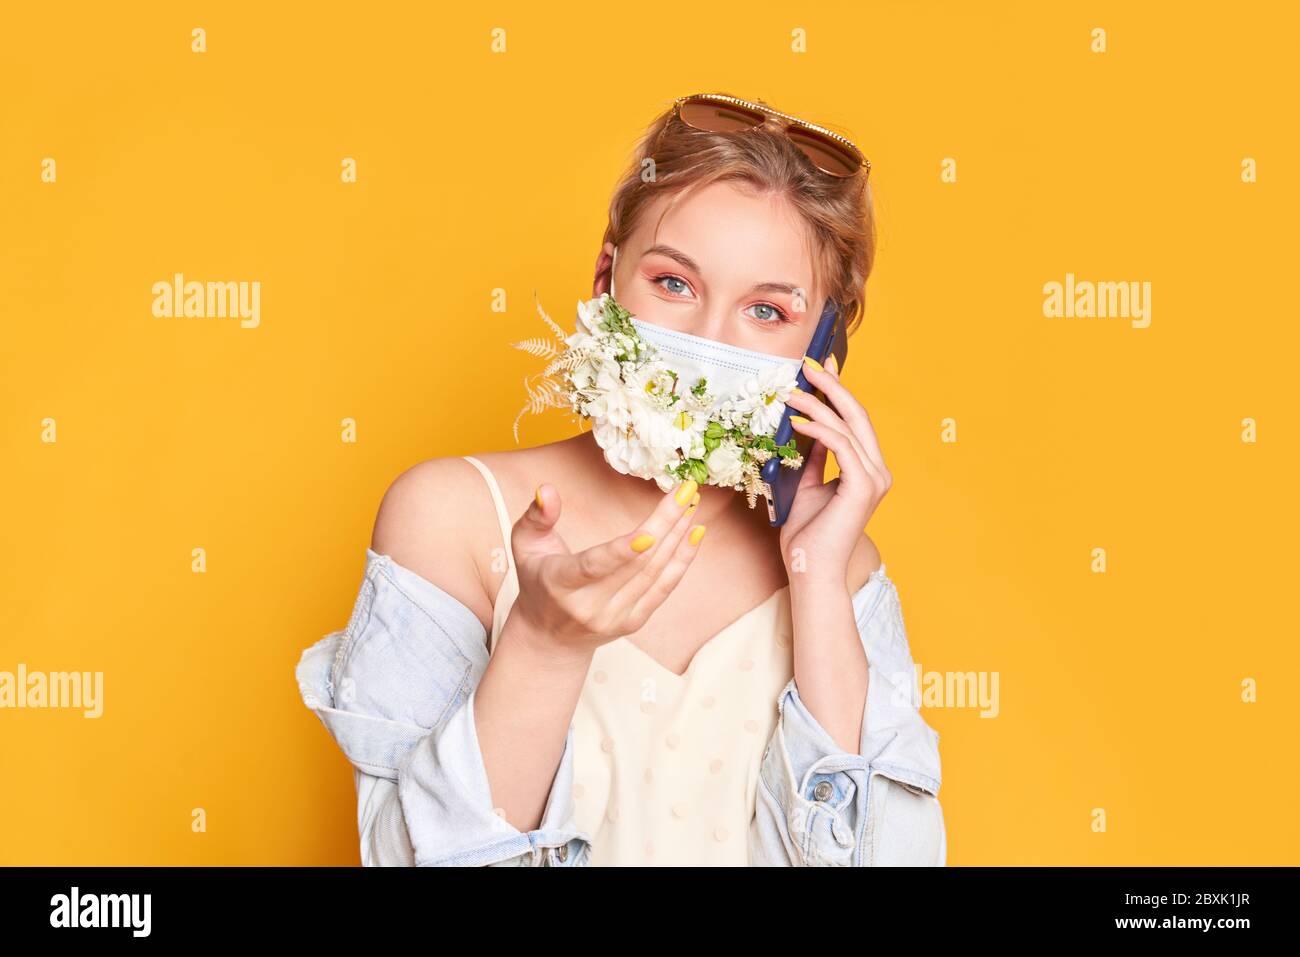 Beautiful woman in medical mask with flower design, holding telephone Stock Photo